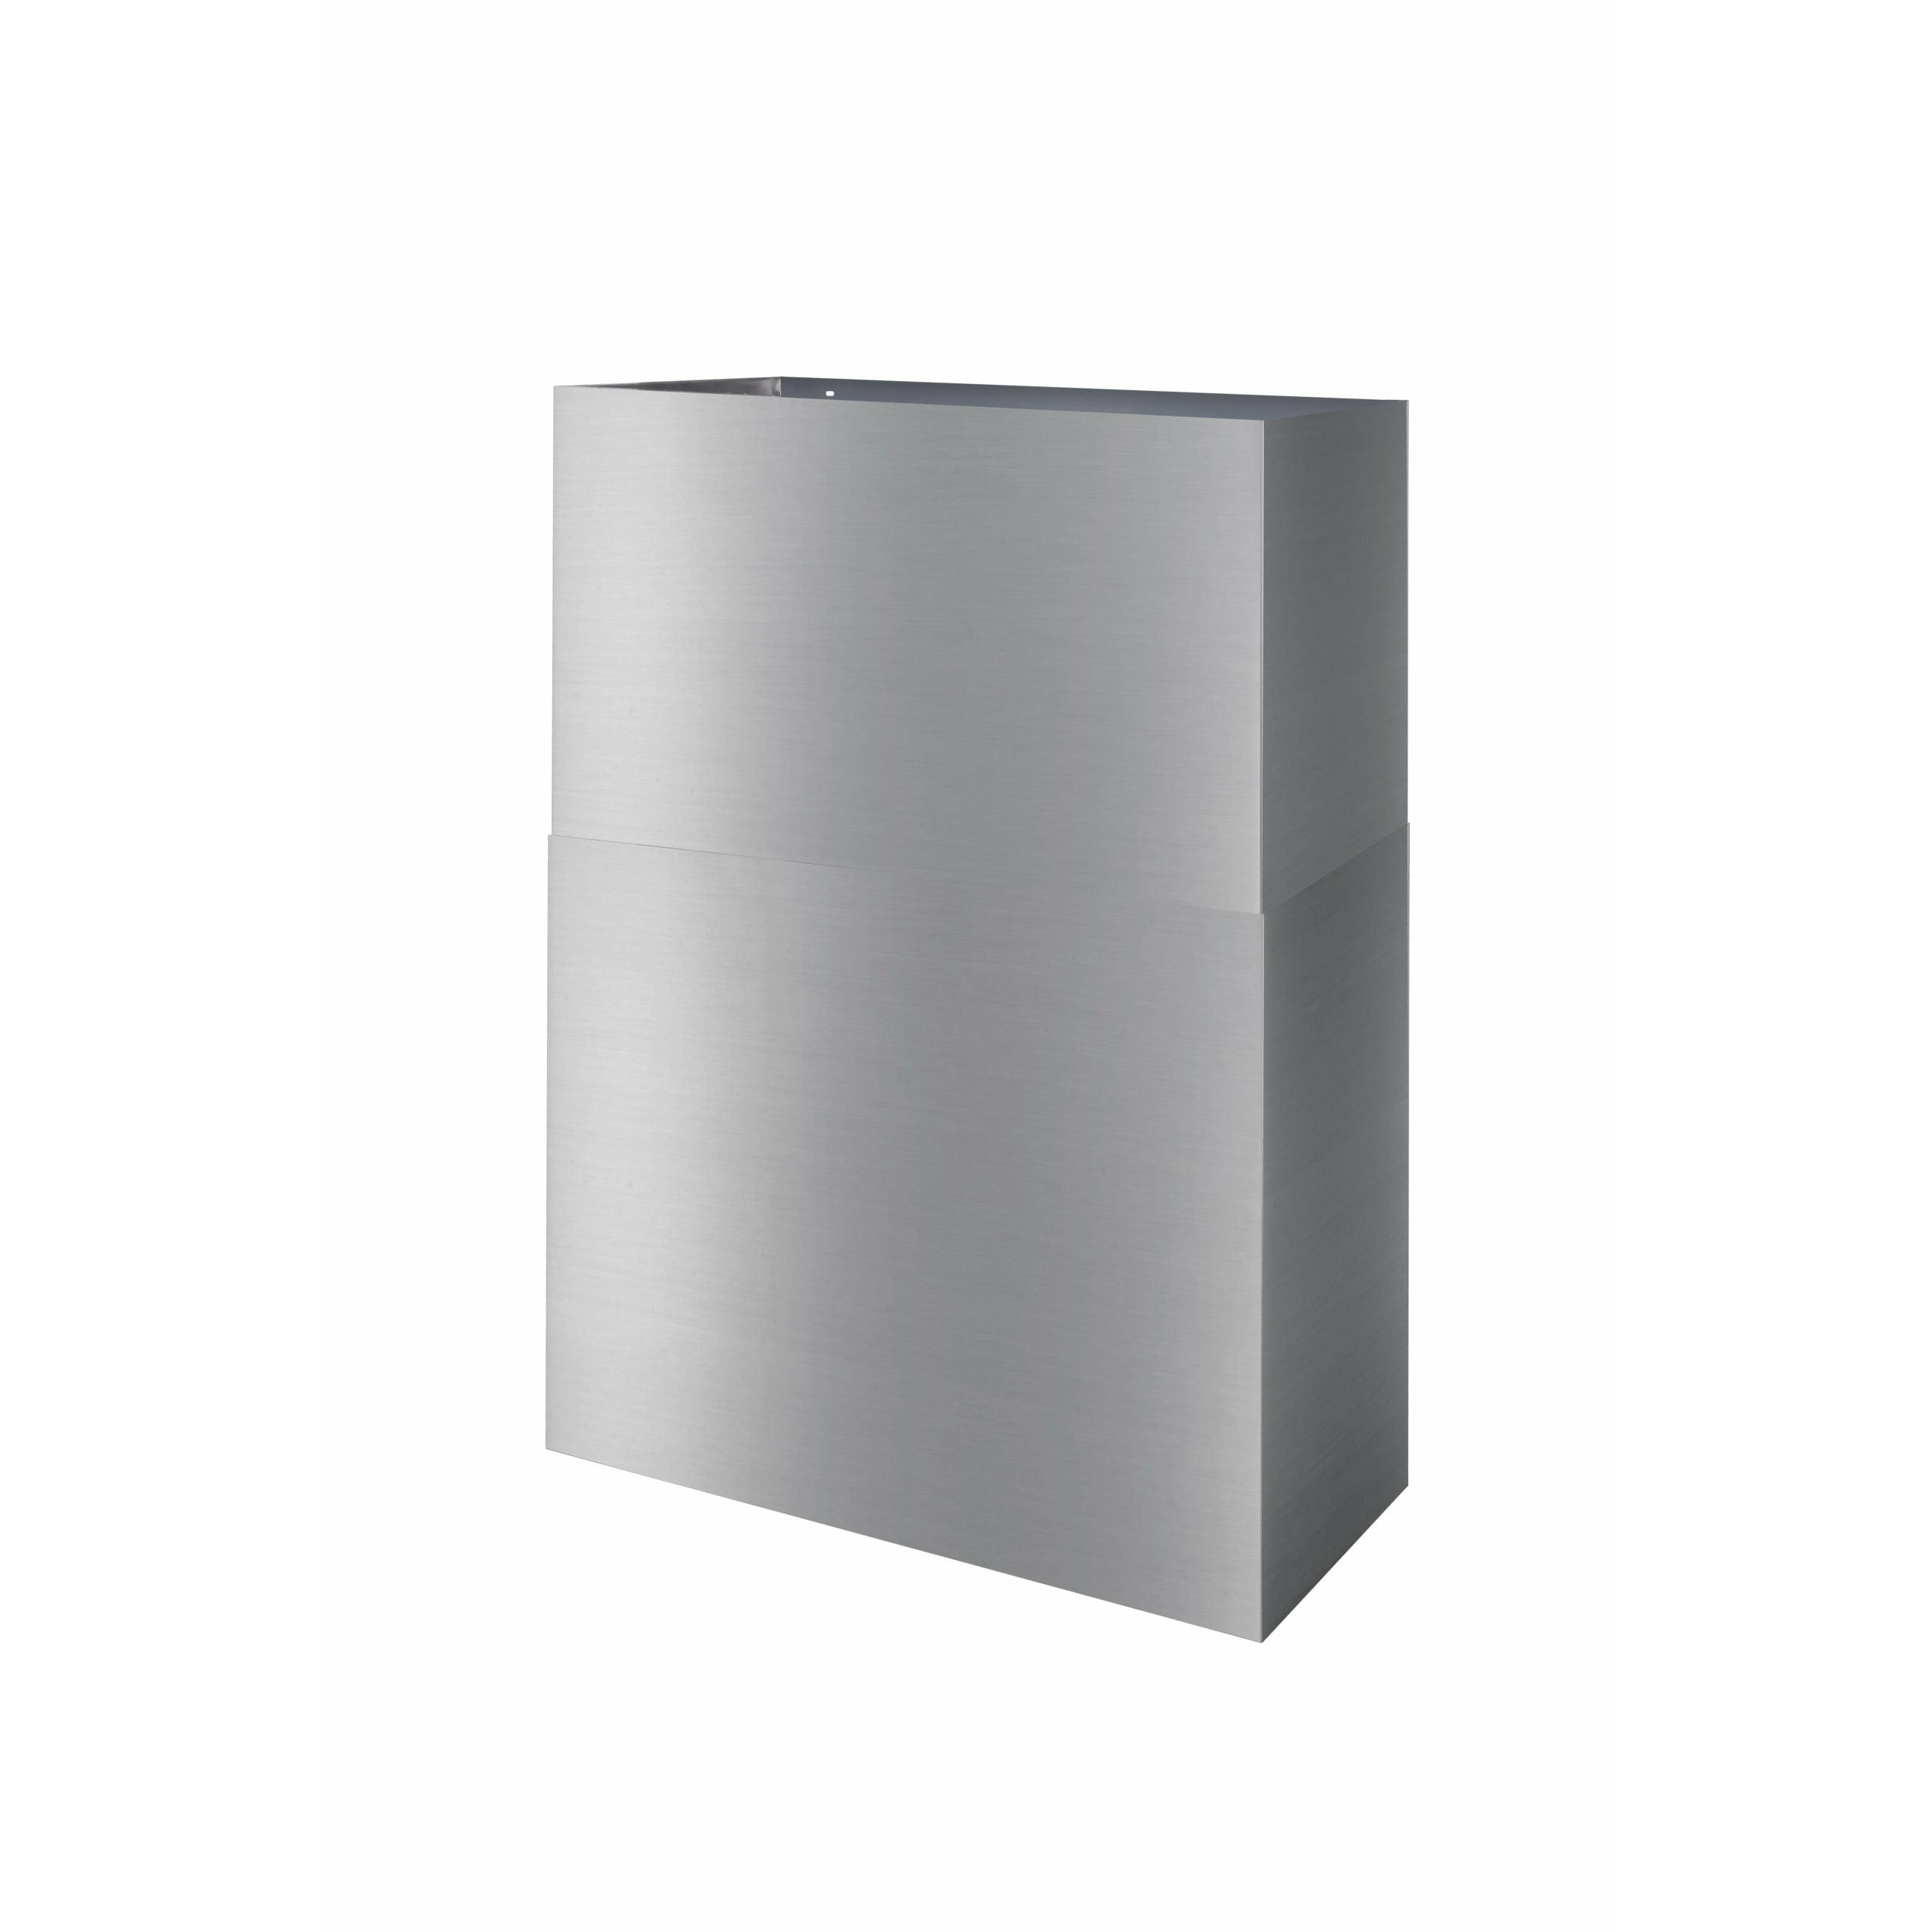 Thor Kitchen 36 INCH DUCT COVER FOR RANGE HOOD IN STAINLESS STEEL - RHDC3656